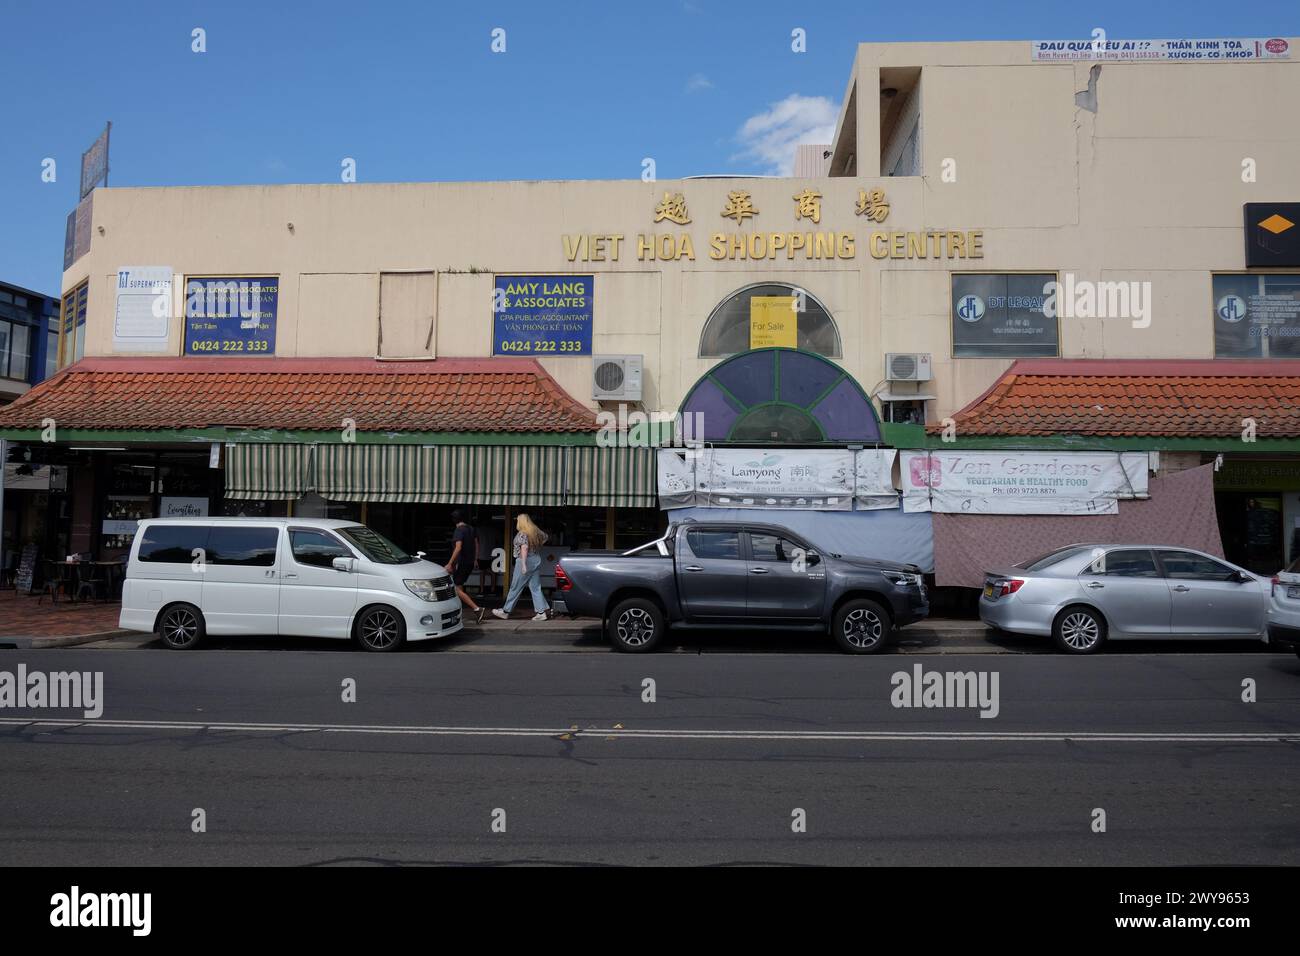 Viet Hoa Shopping Centre, street frontage with parked cars Asian fruit and vegetable markets in Cabramatta, Western Sydney Stock Photo